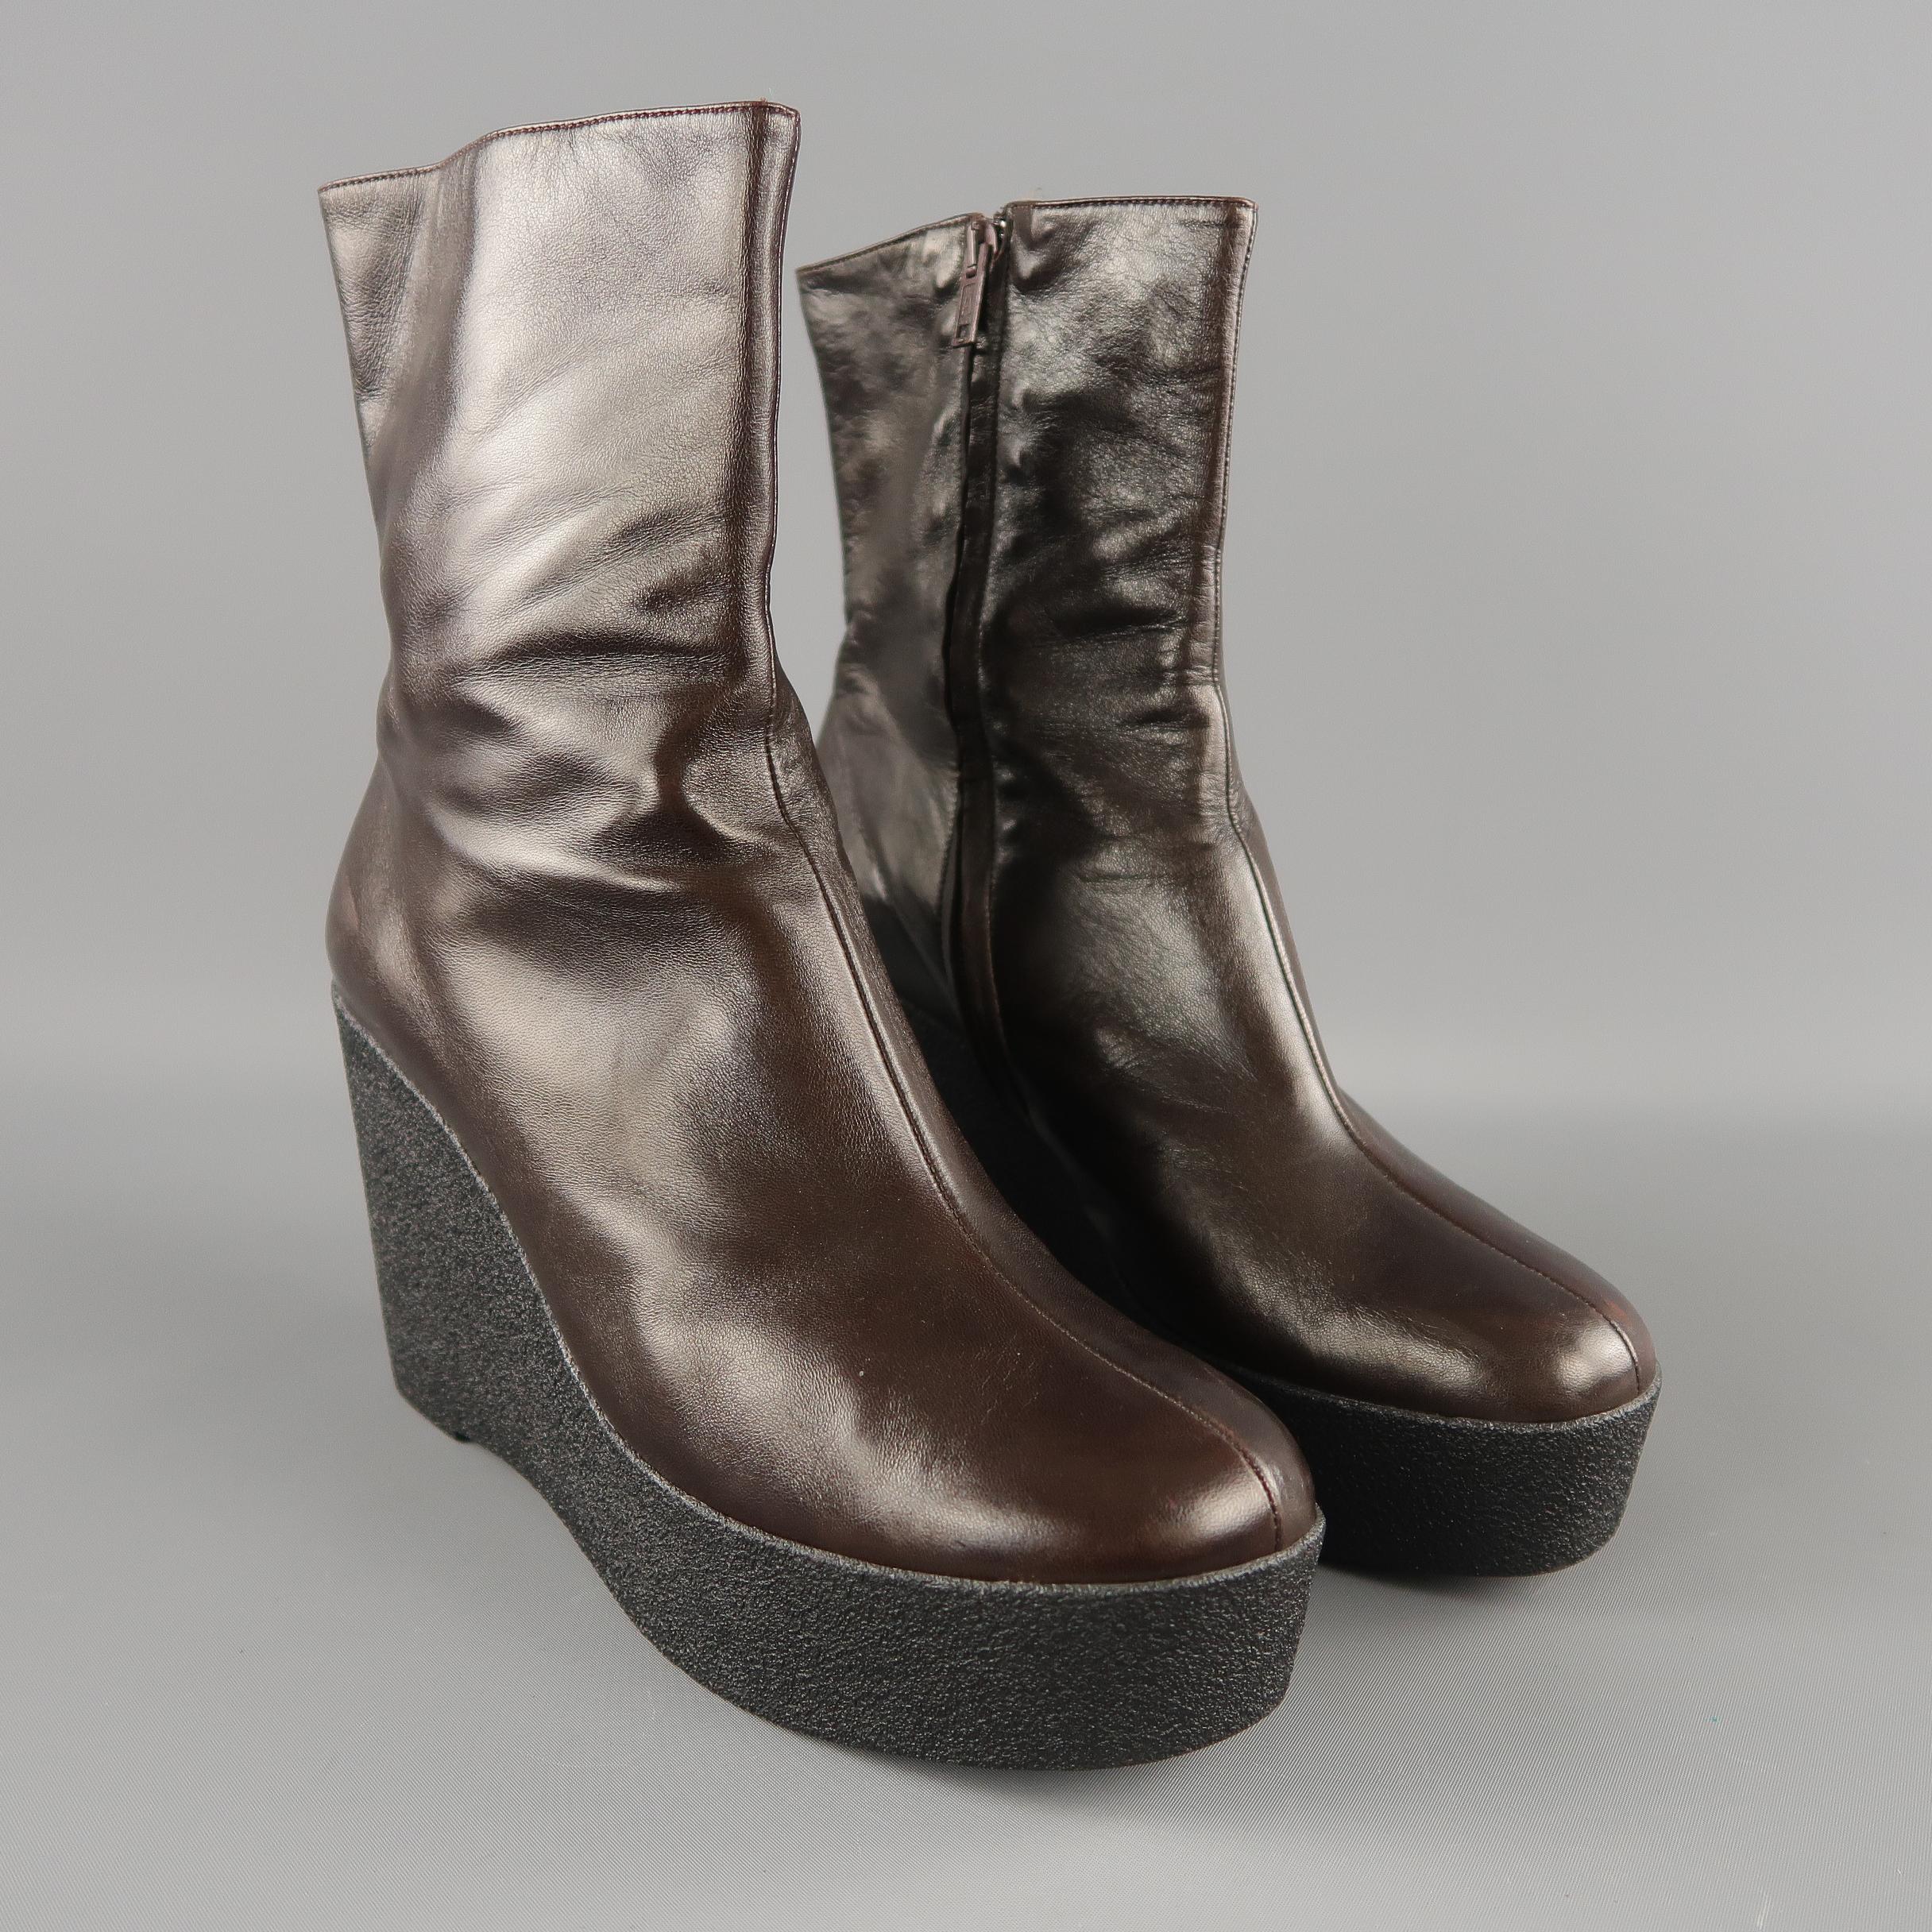 ROBERT CLERGERIE ankle boots come in chocolate brown smooth leather with a round toe, inner zip, and black crepe platform wedge. Like new. Made in France.
 
Excellent Pre-Owned Condition. Retails: $575.00.
Marked: 10
 
Measurements:
 
Heel: 4